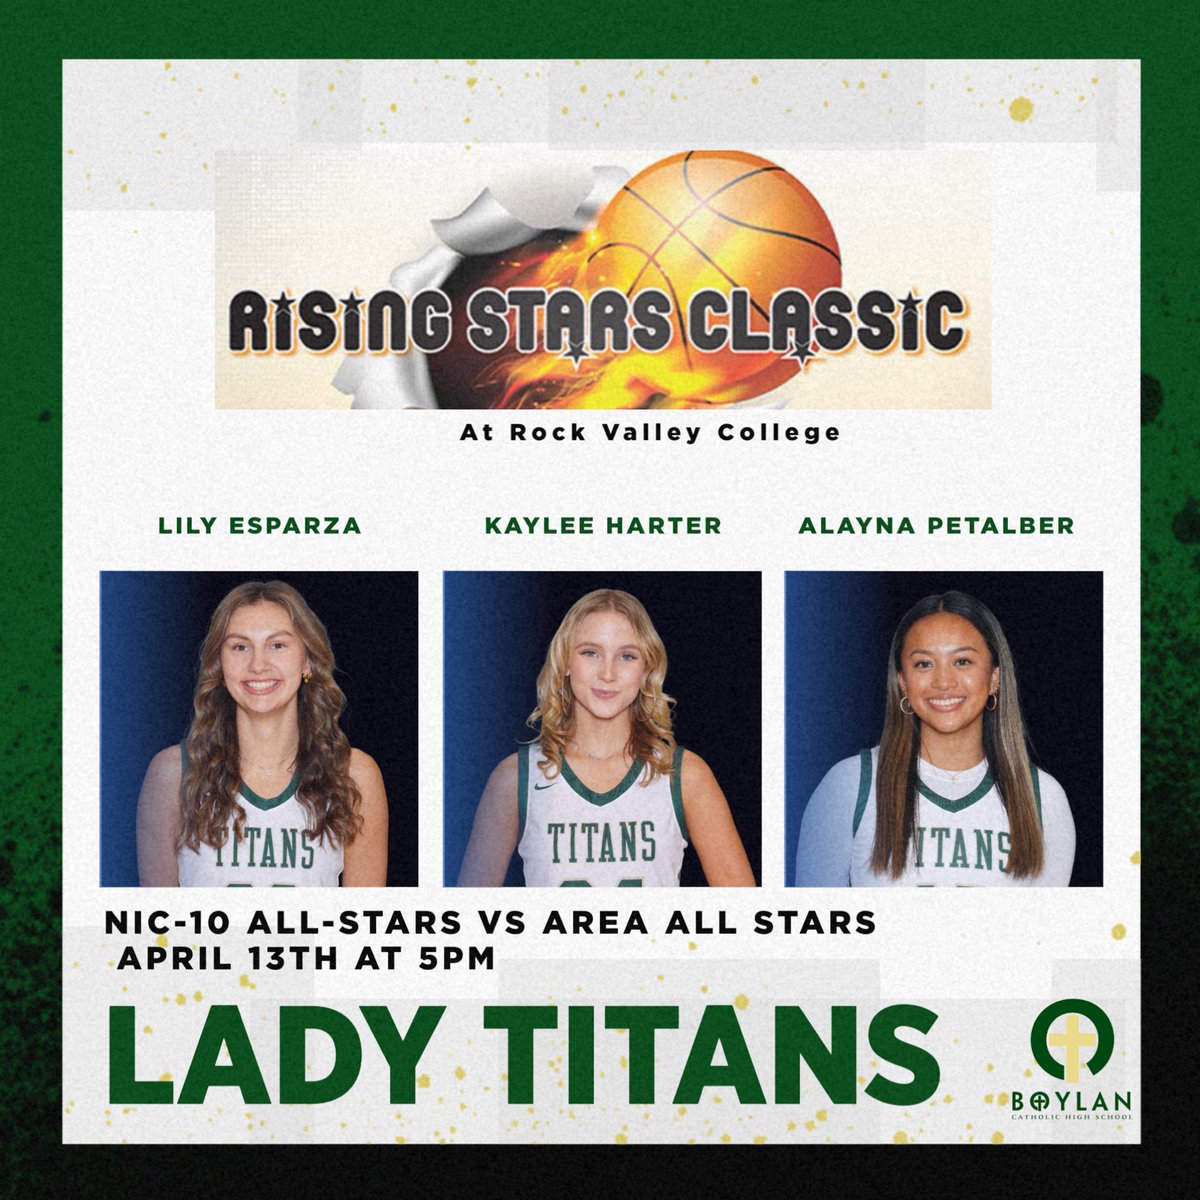 Come out to Rock Valley College Saturday, and cheer on Lily, Kaylee, and Alayna as they compete in the Rising Stars Classic. Game is at 5pm.